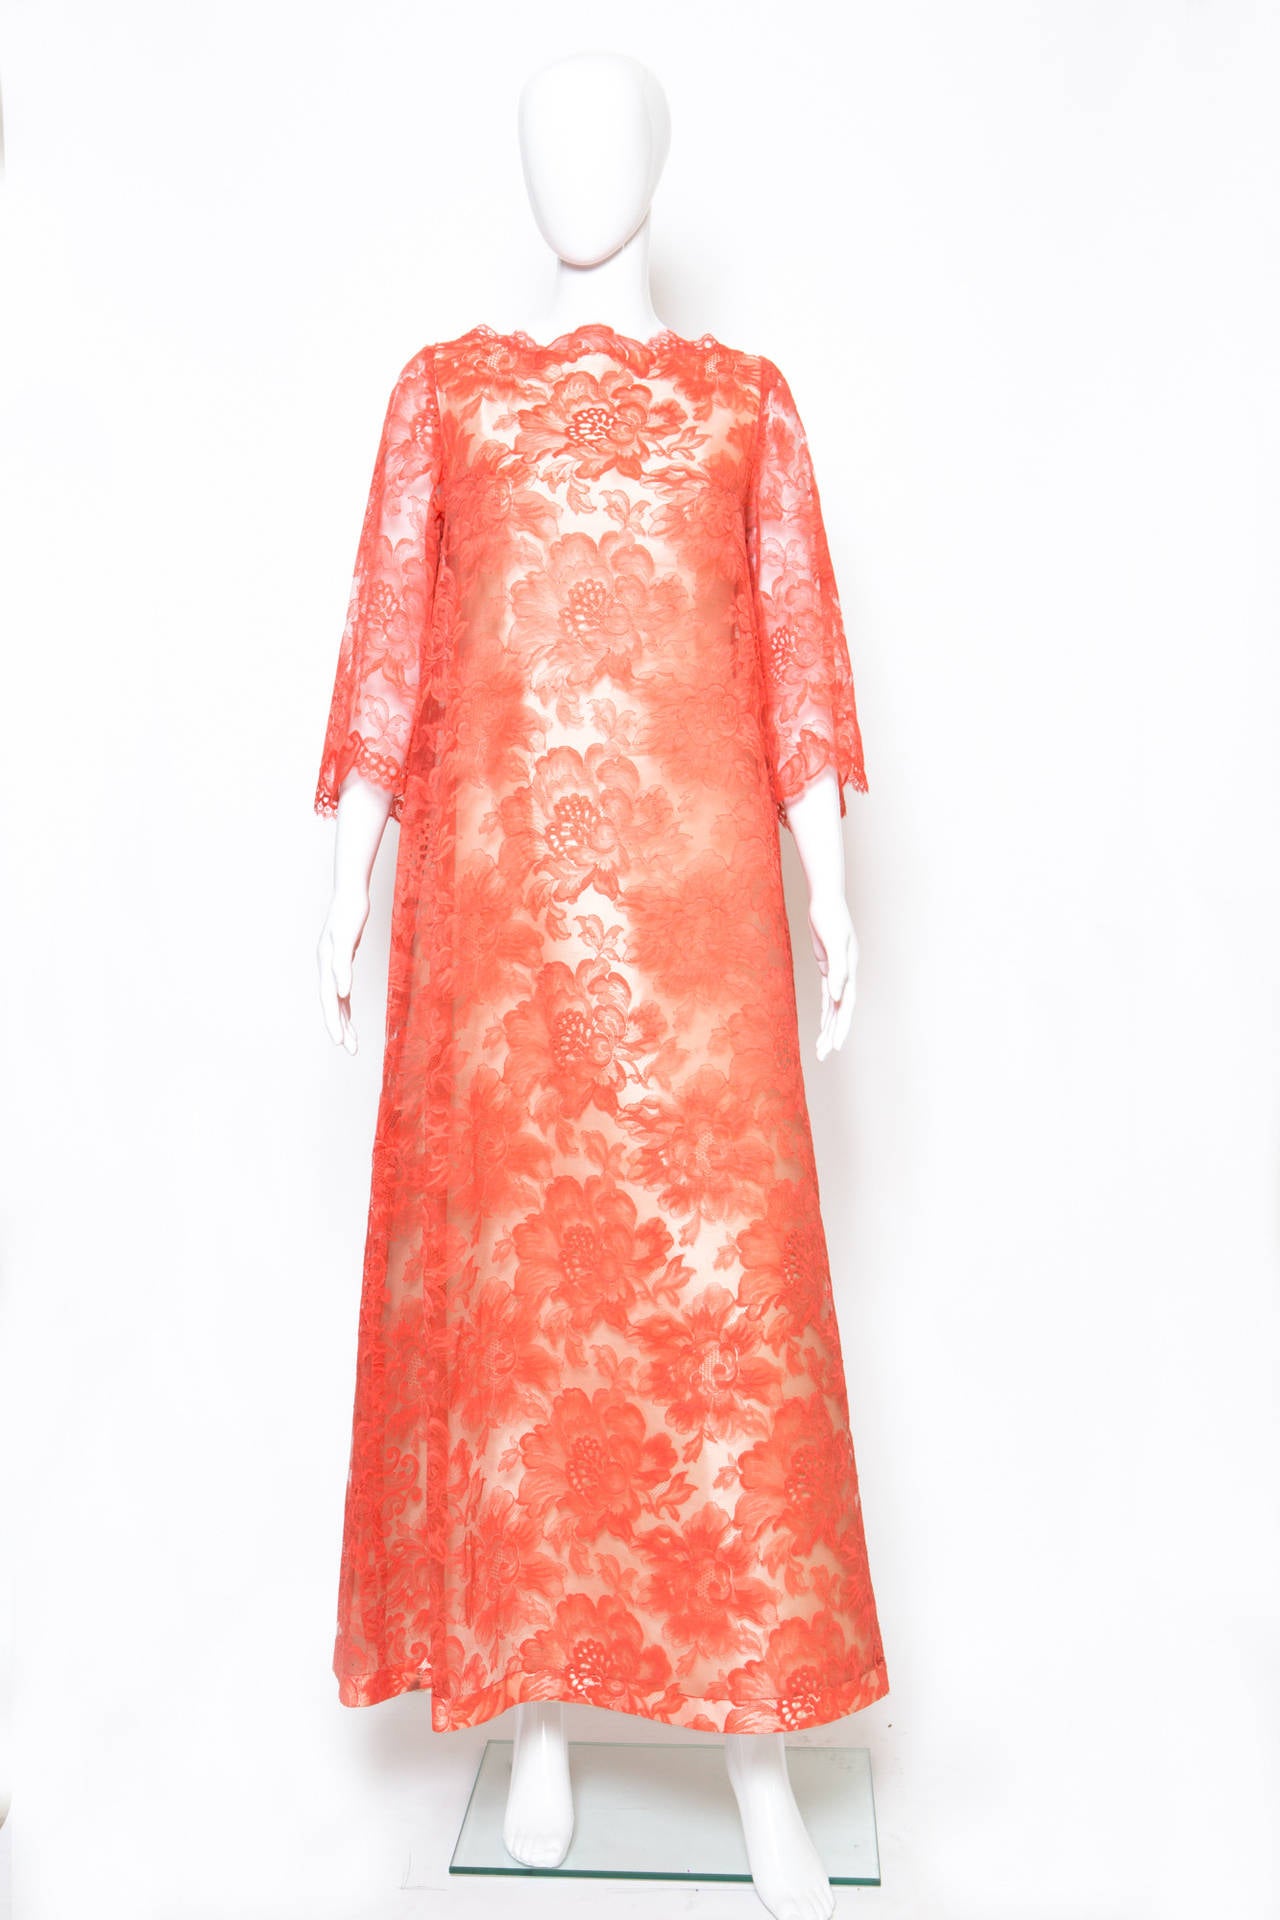 Fabulous and rare evening dress from Guy Laroche par Maria Carine featuring a cream silk satin center back zipped dressed covered with a fixed soft mandarin floral lace, the dress gets a ¾ seethrought  lace sleeves.
In good vintage condition. Made